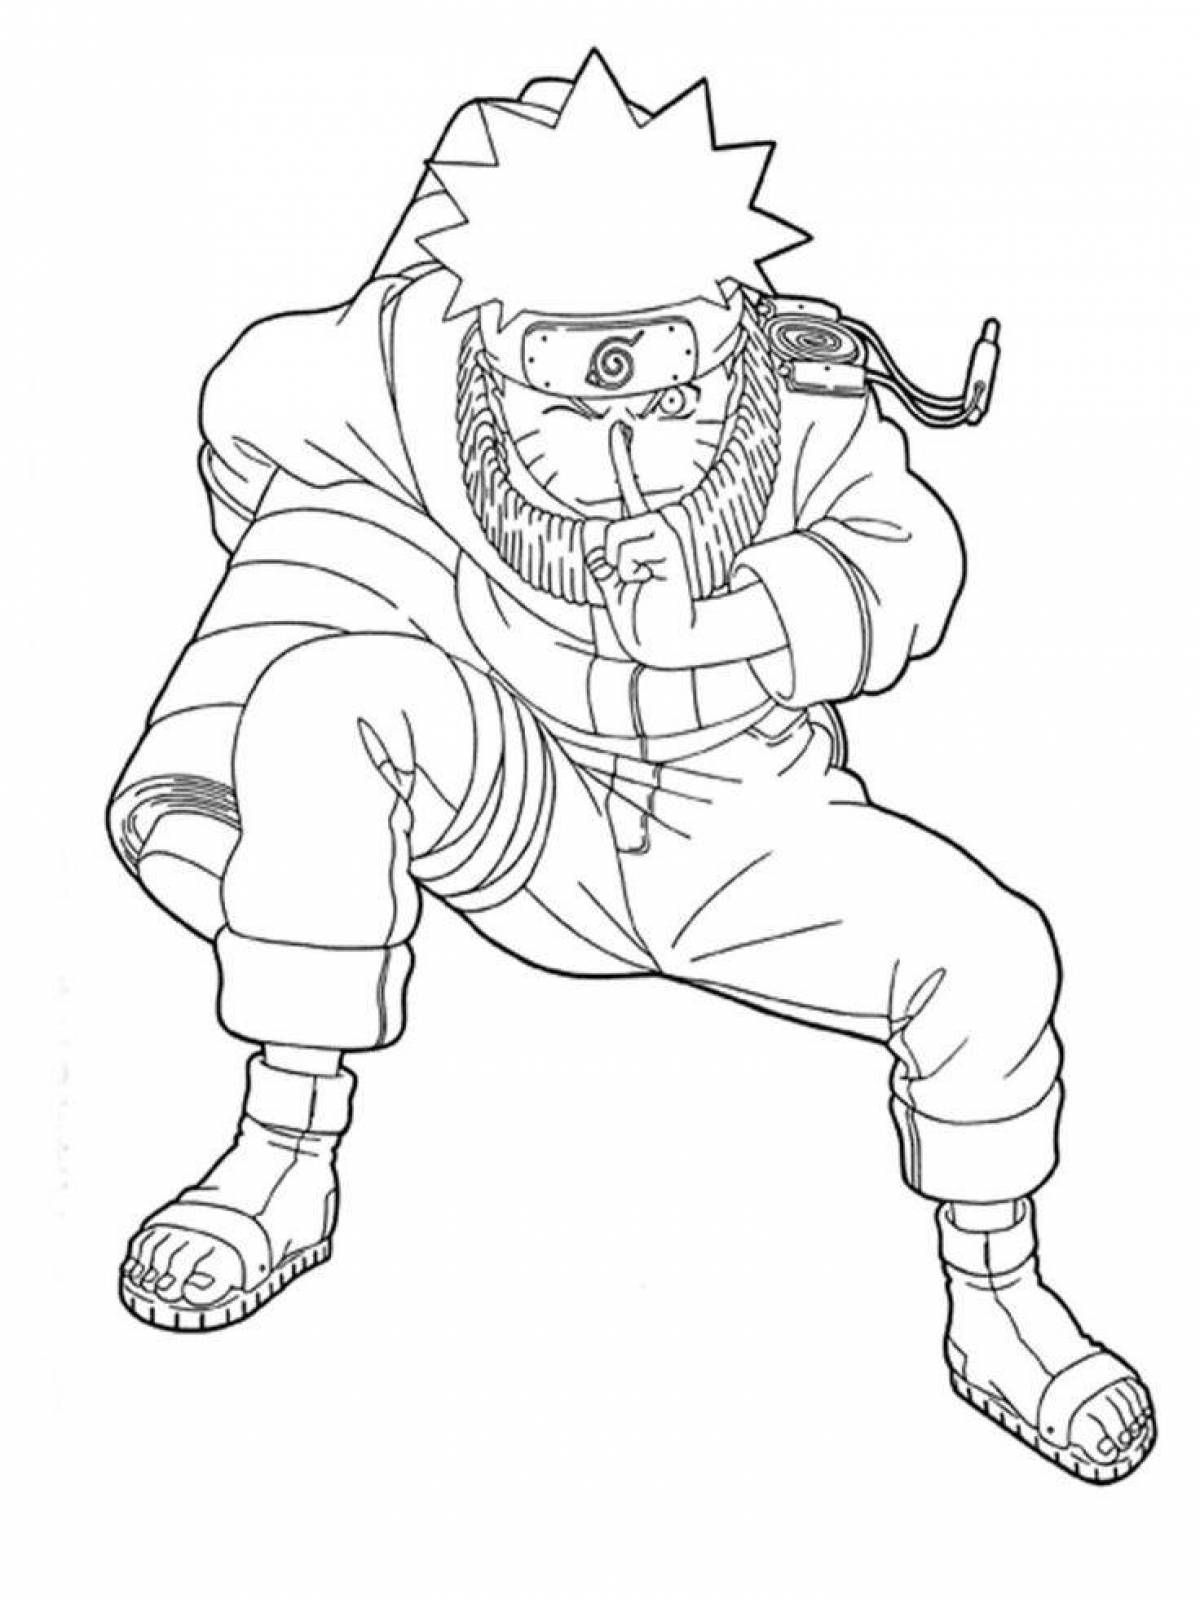 Innovative naruto coloring book for kids